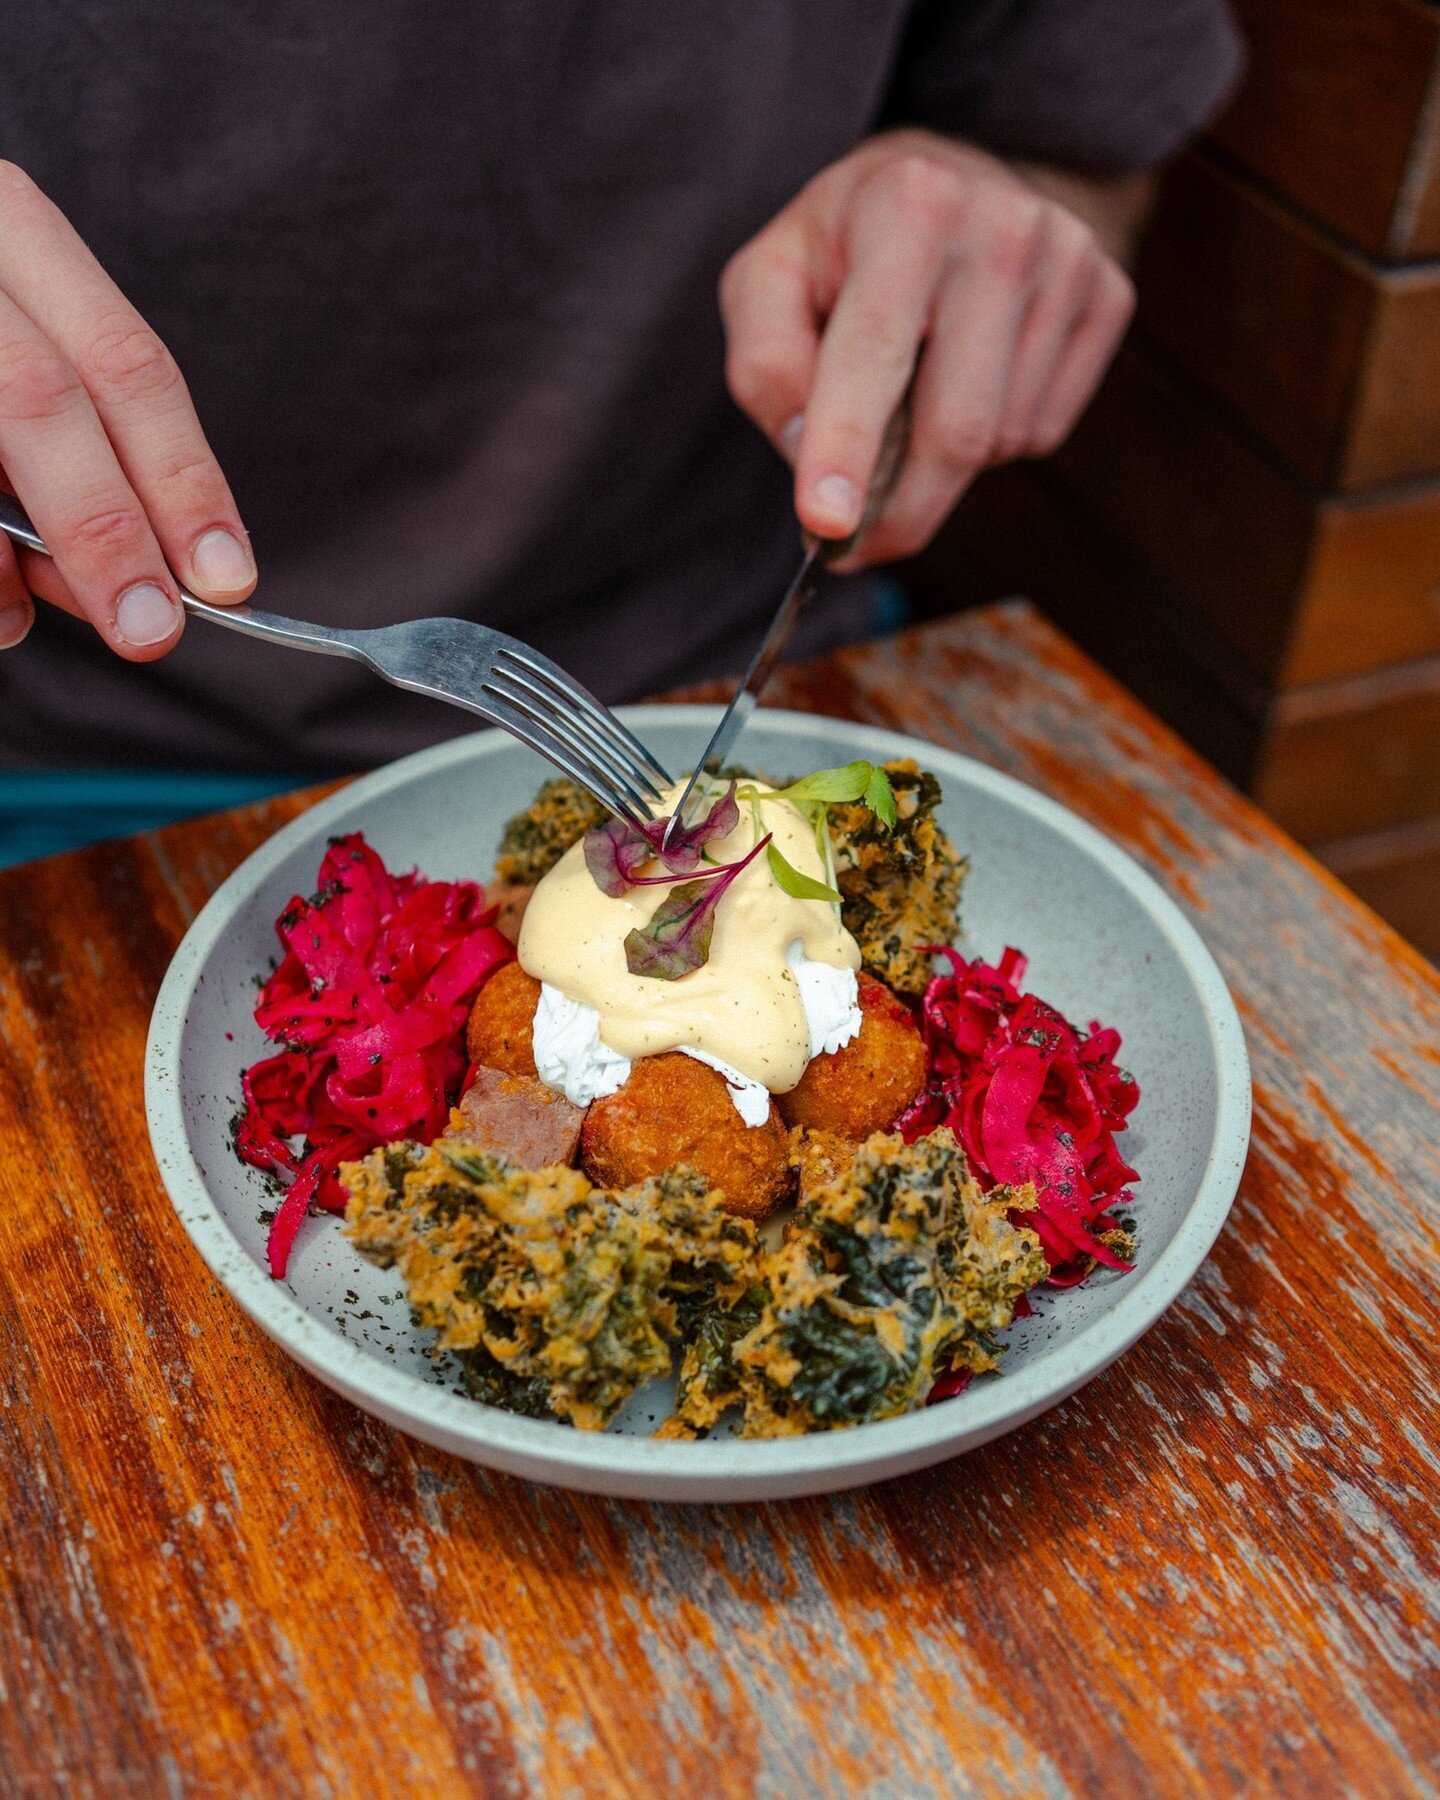 One of our all-time favourites: The Nori Croquettes! 😍⁠
⁠
Korokke potato croquettes served with slow cook pulled corned beef, nori hollandaise, poached egg, tempura kale and pickled cucumber. Simply amazing! 🤤